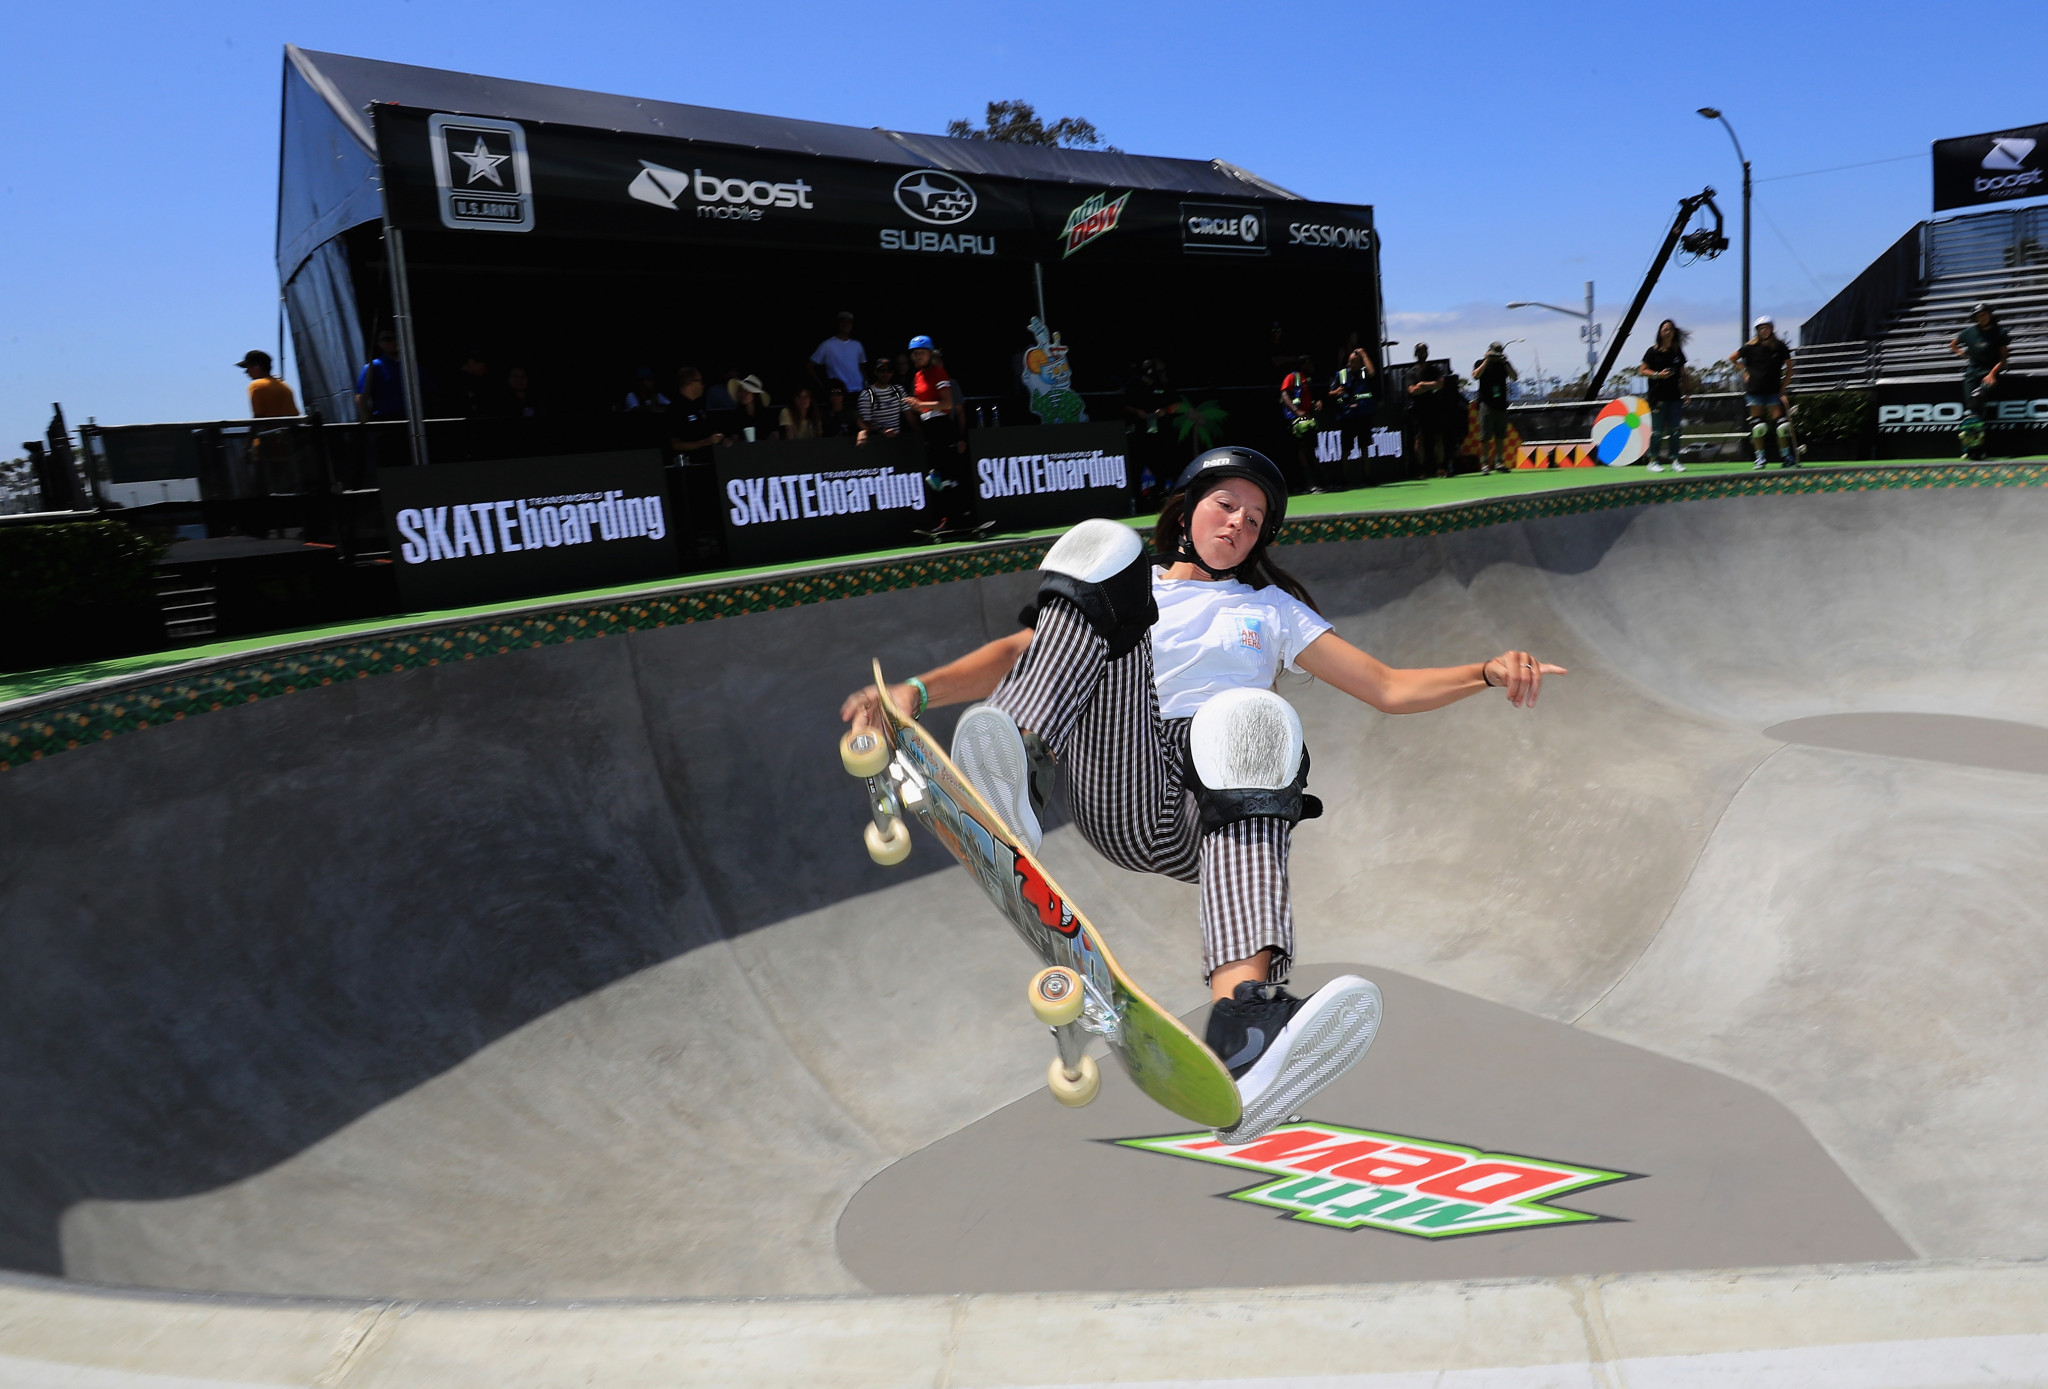 Nicole Hause has been appointed by the USOPC to represent the interests of the athletes at USA Skateboarding ©Getty Images